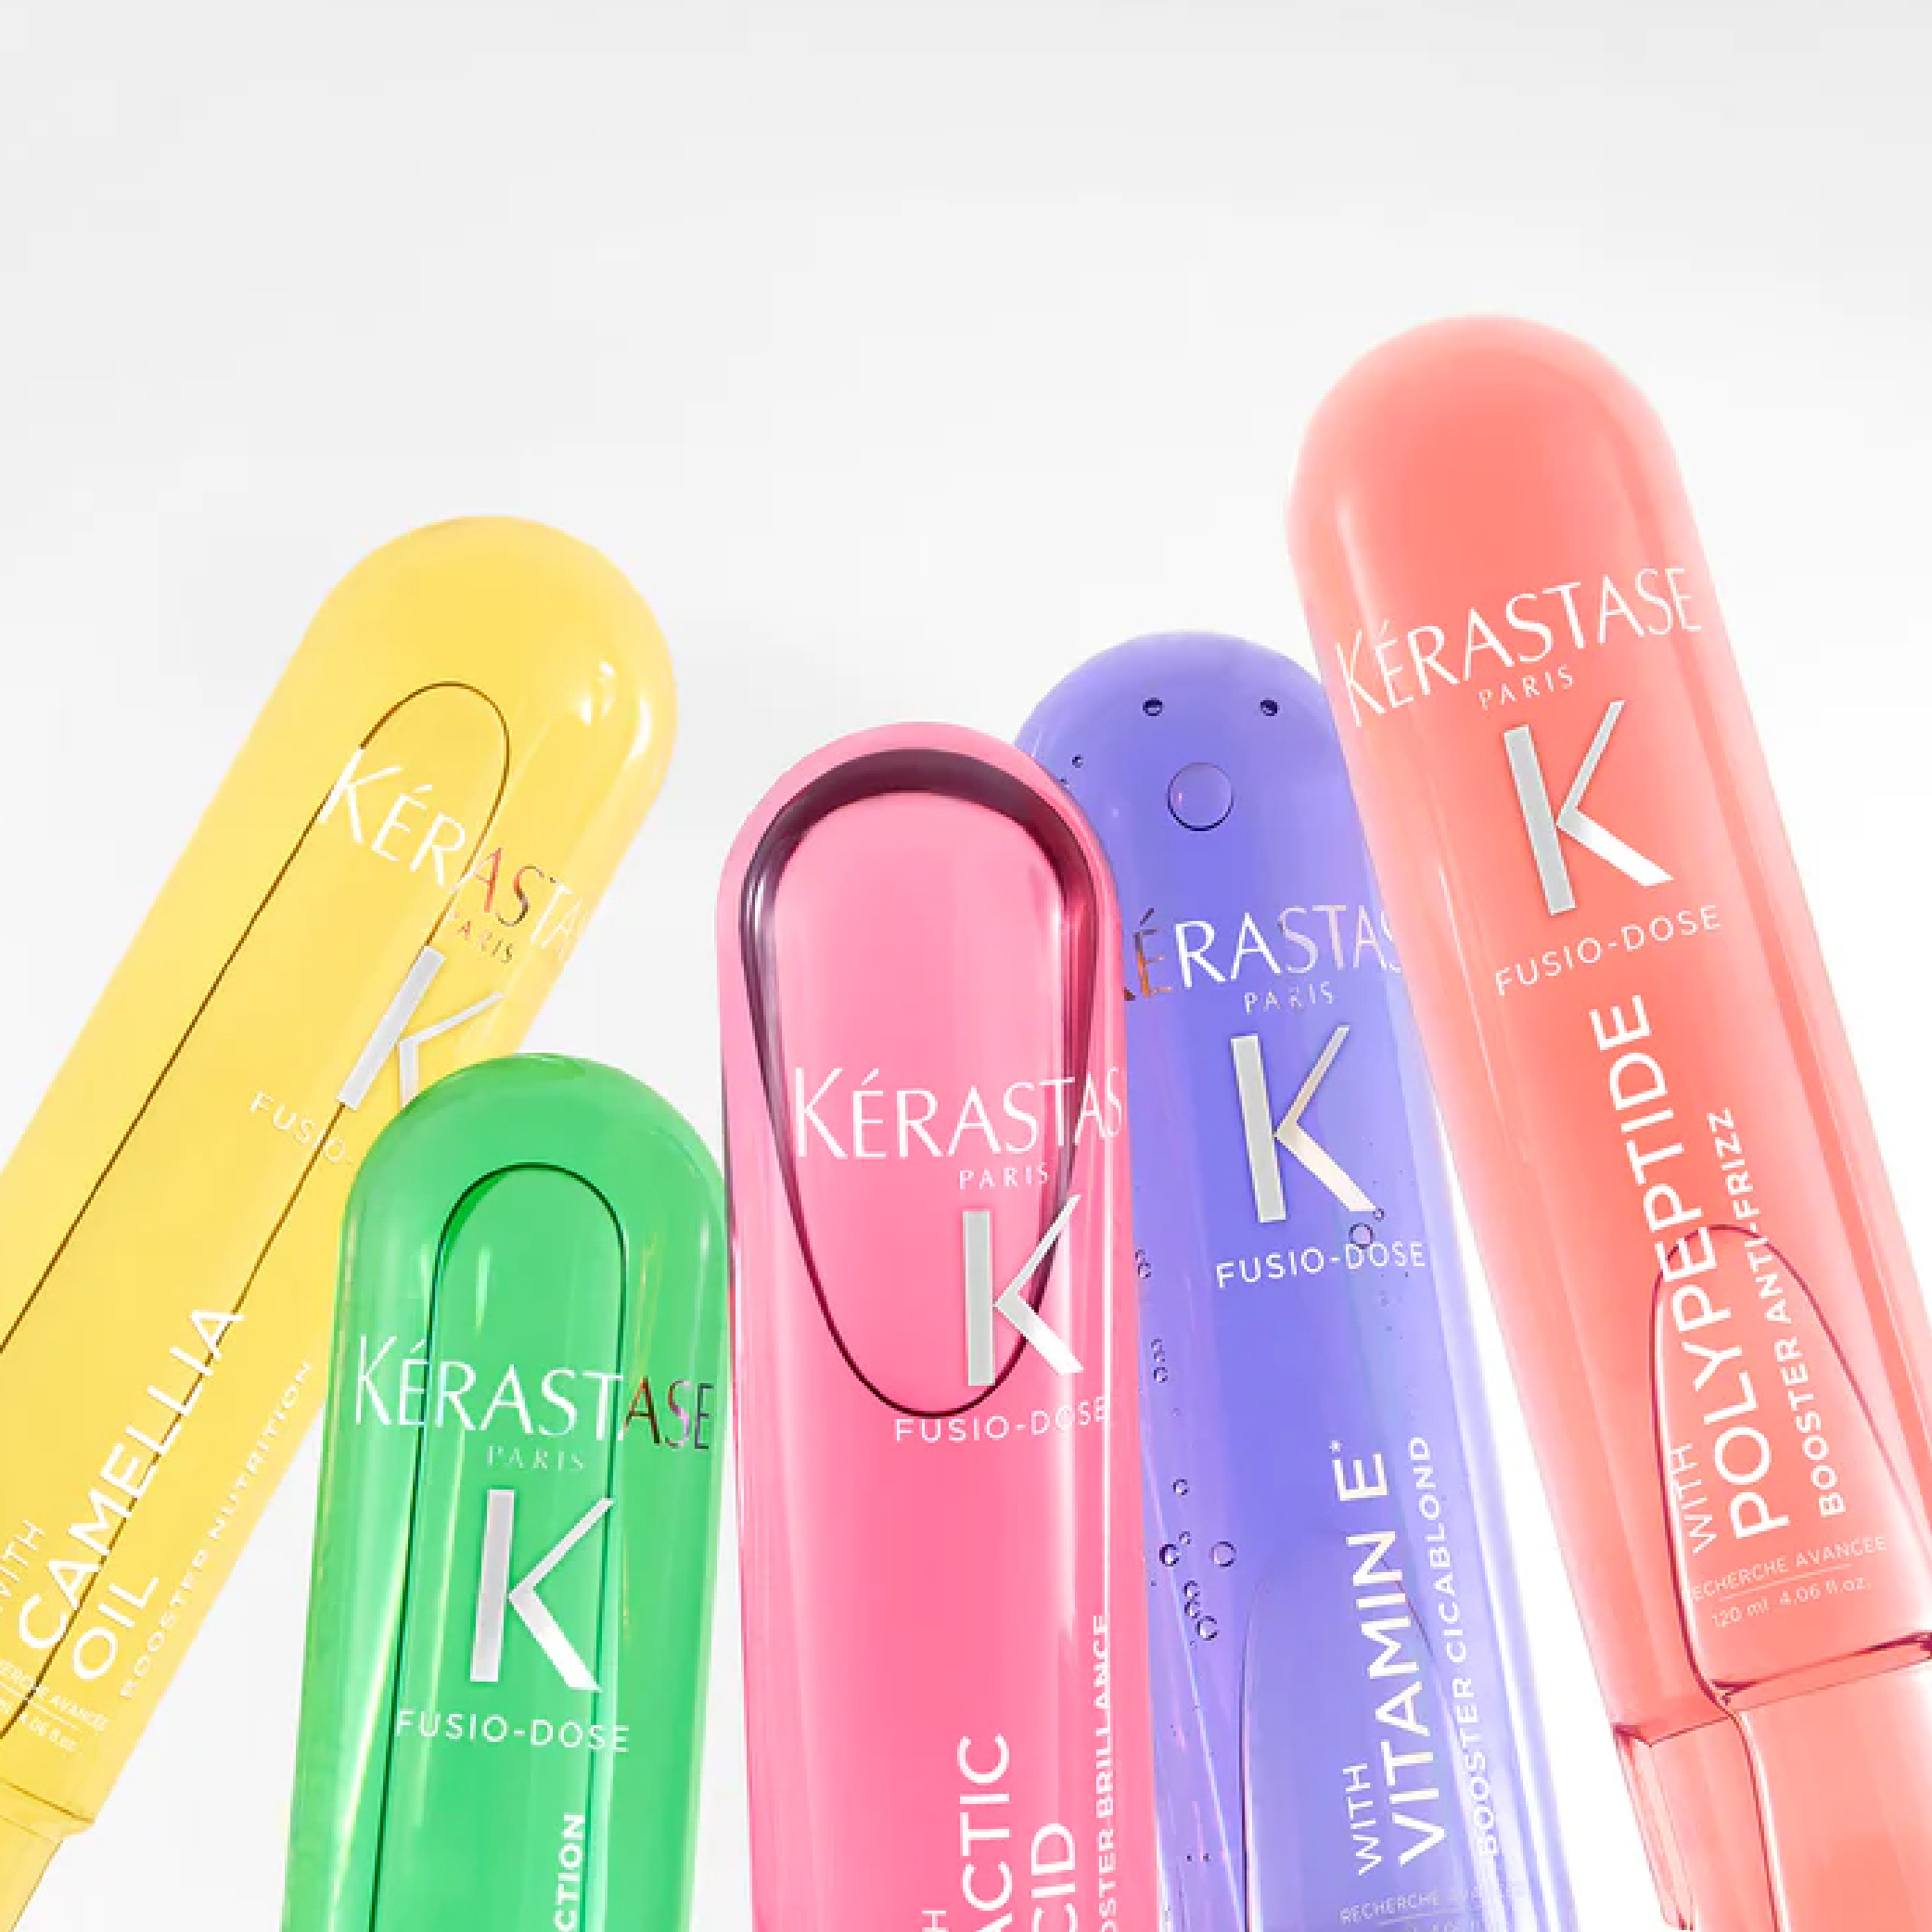 Featured image for "Unlock the Magic of Beautiful Hair with Kerastase Fusio-Dose Treatments"